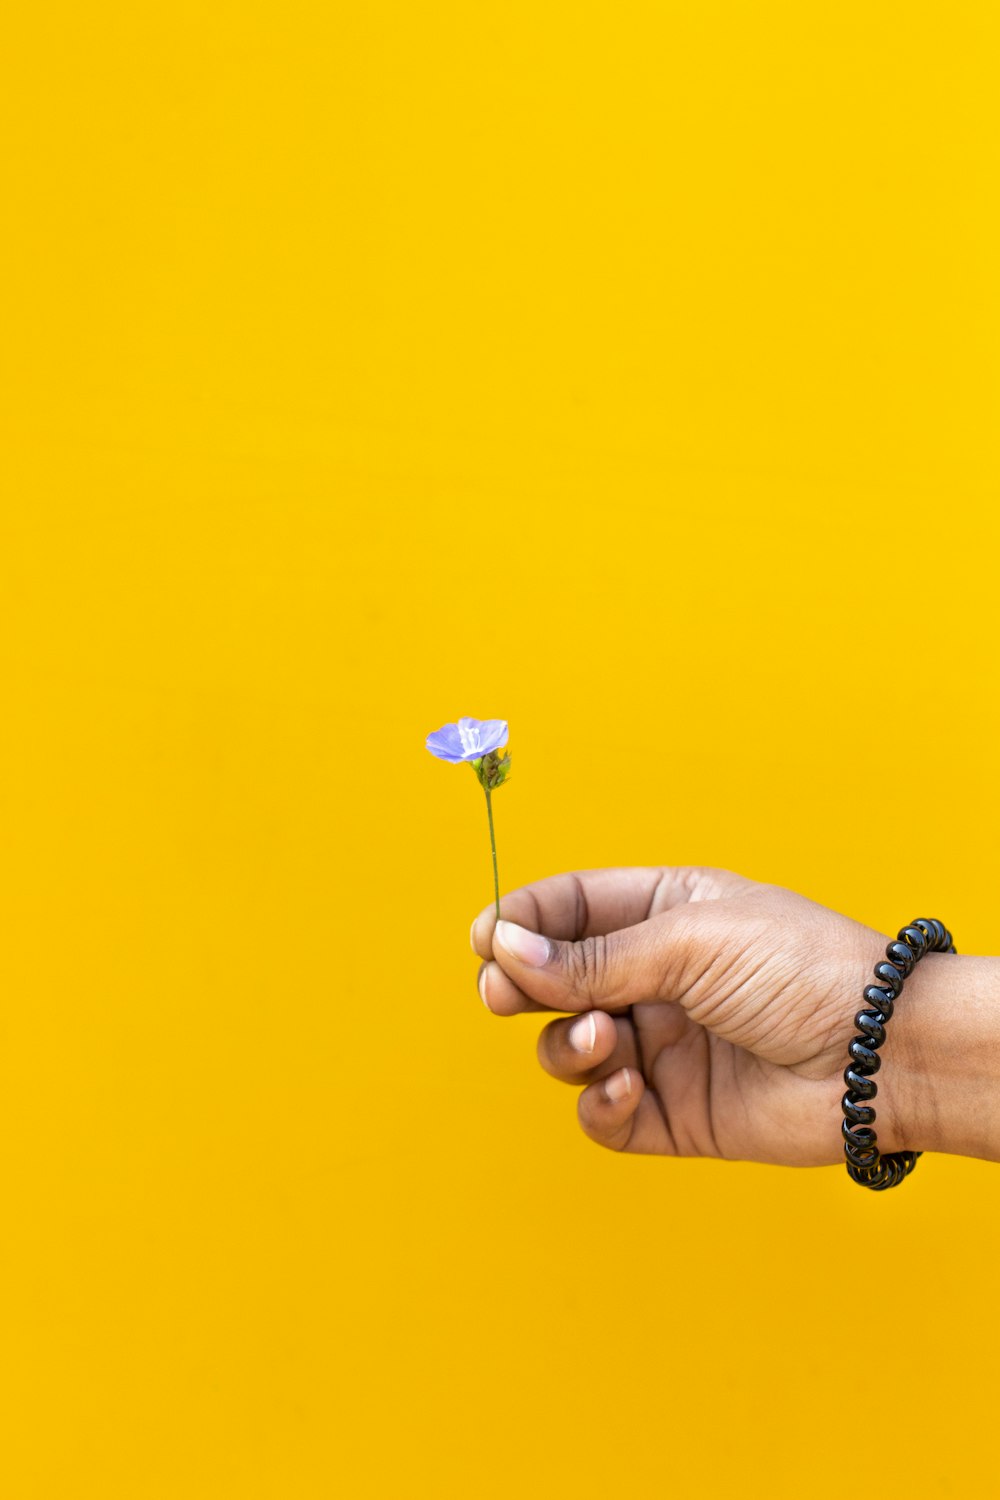 a person's hand holding a small flower on a yellow background